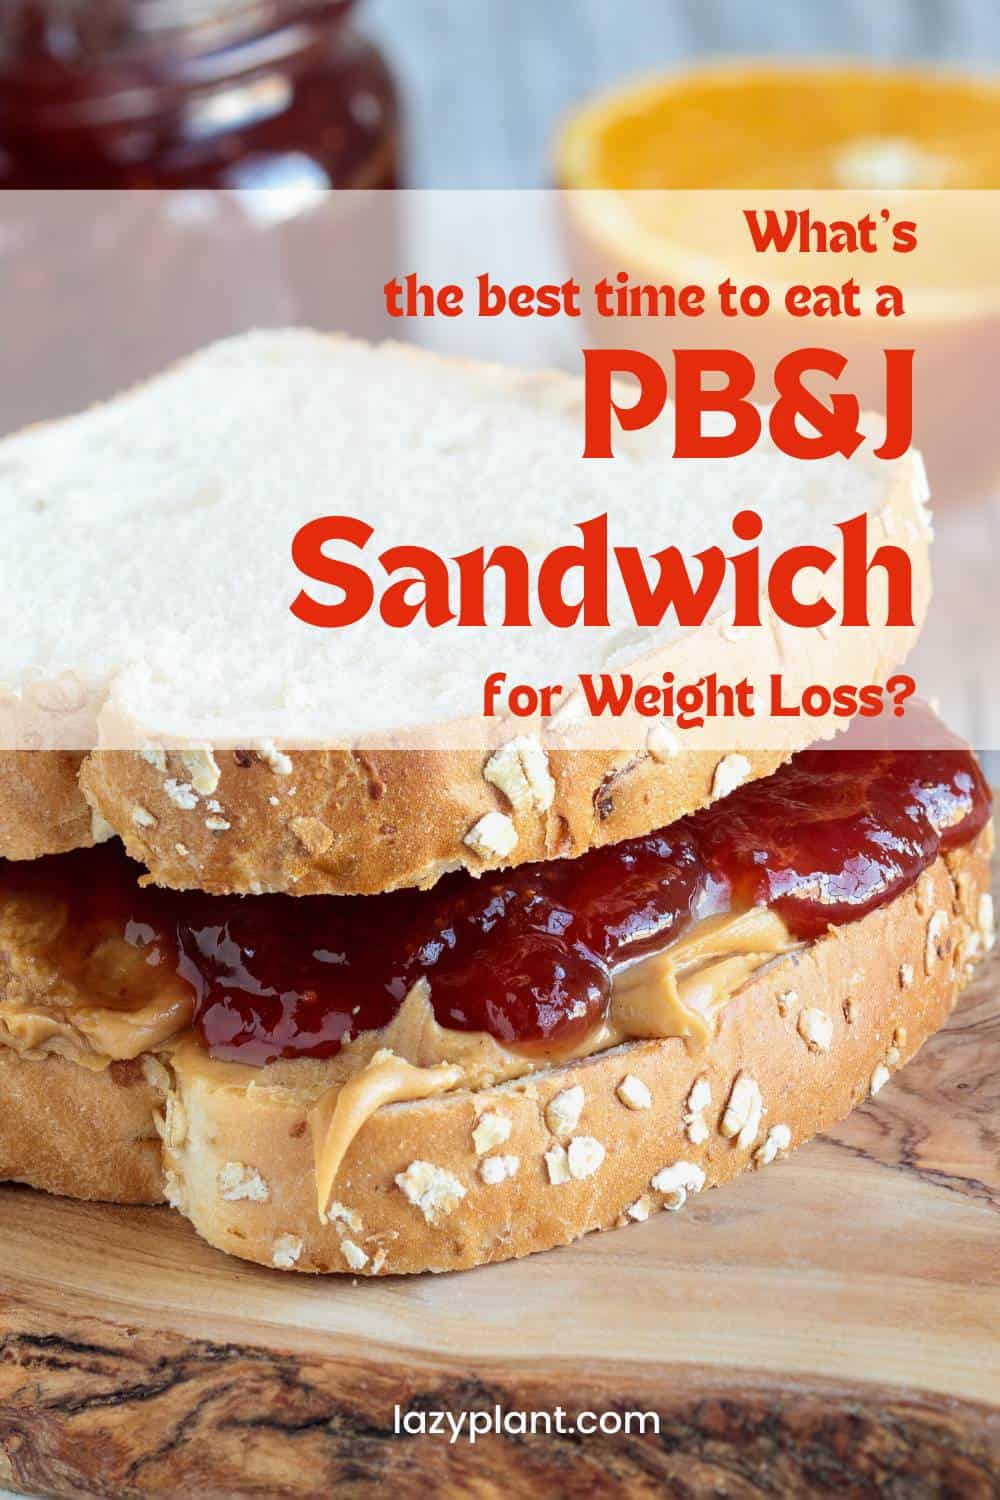 The best time to eat a PB&J sandwich for weight loss is between meals.